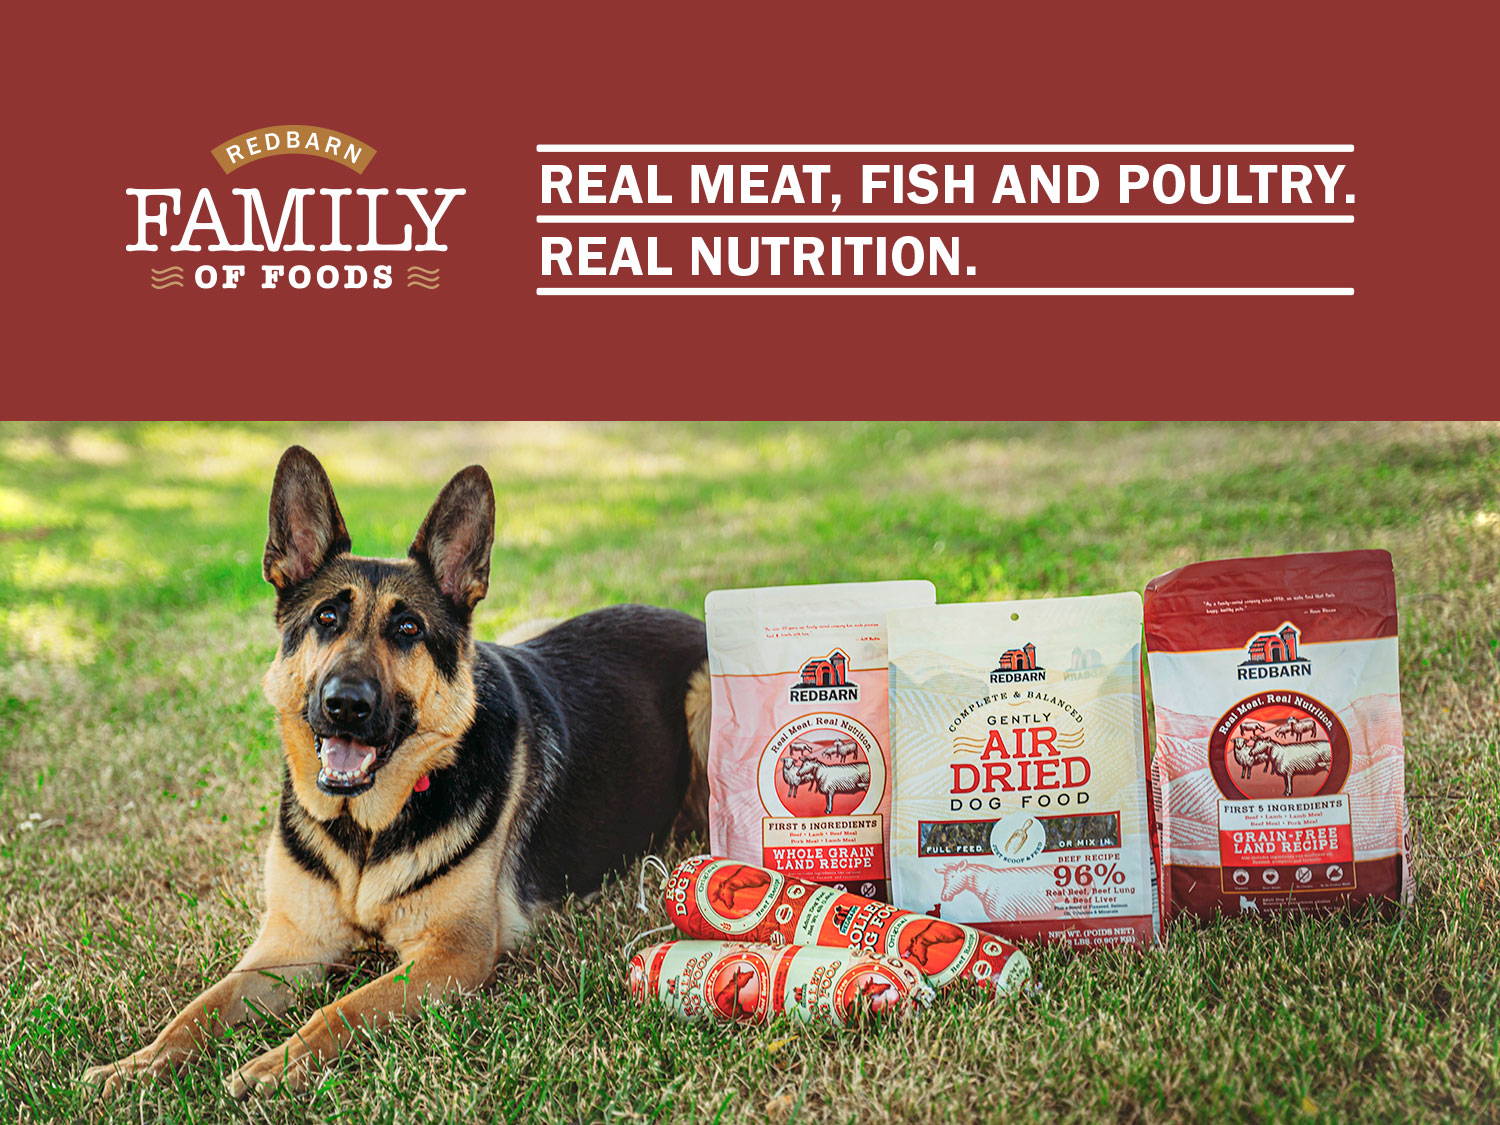 Photo of a dog next to Redbarn dog food. Text: Redbarn Family of Foods. Real meat, fish, and poultry. Real Nutrition.